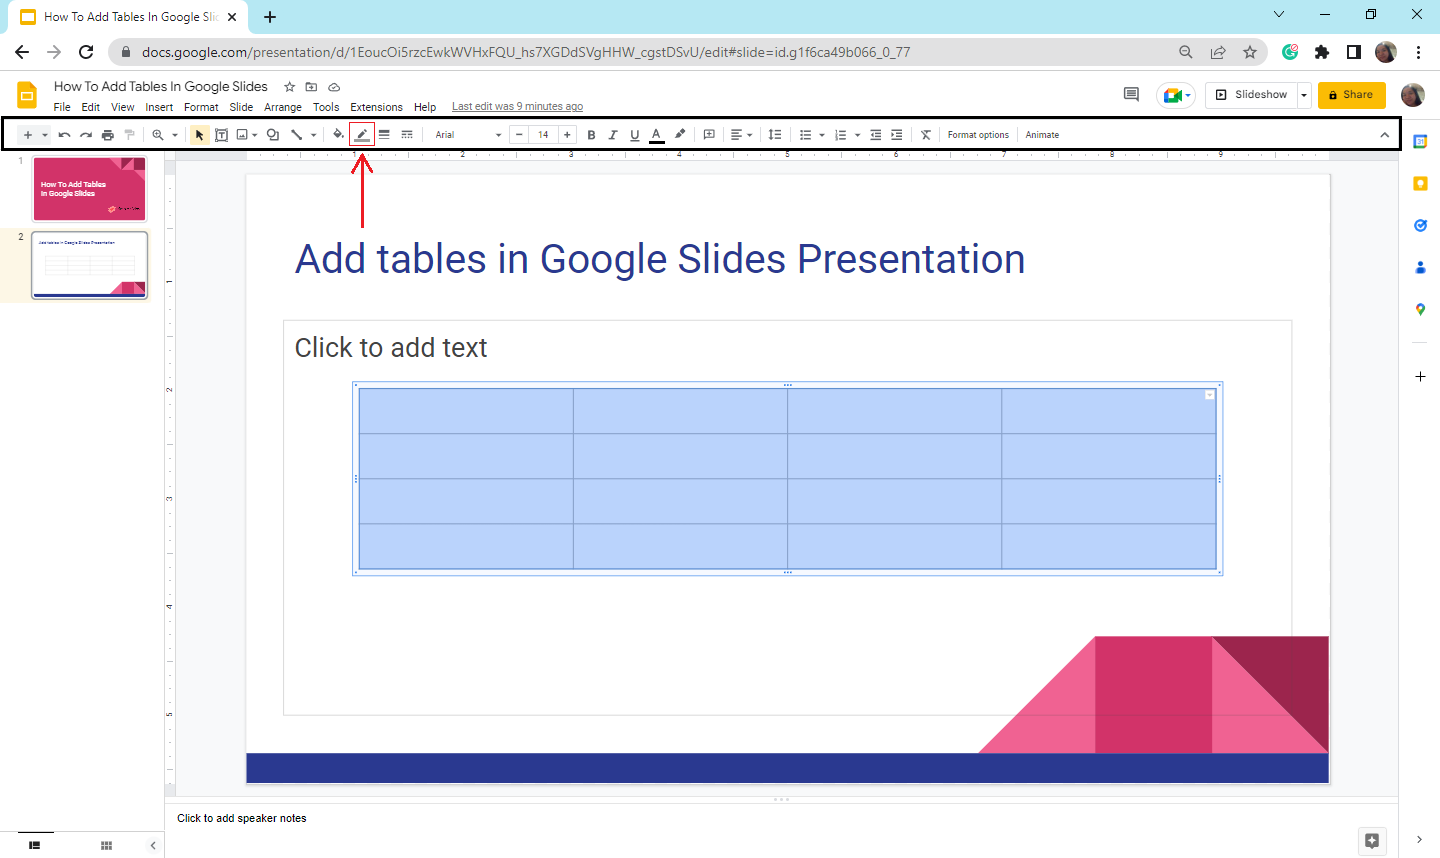 In the toolbar section, select "Border-color" to change the color of your whole table.